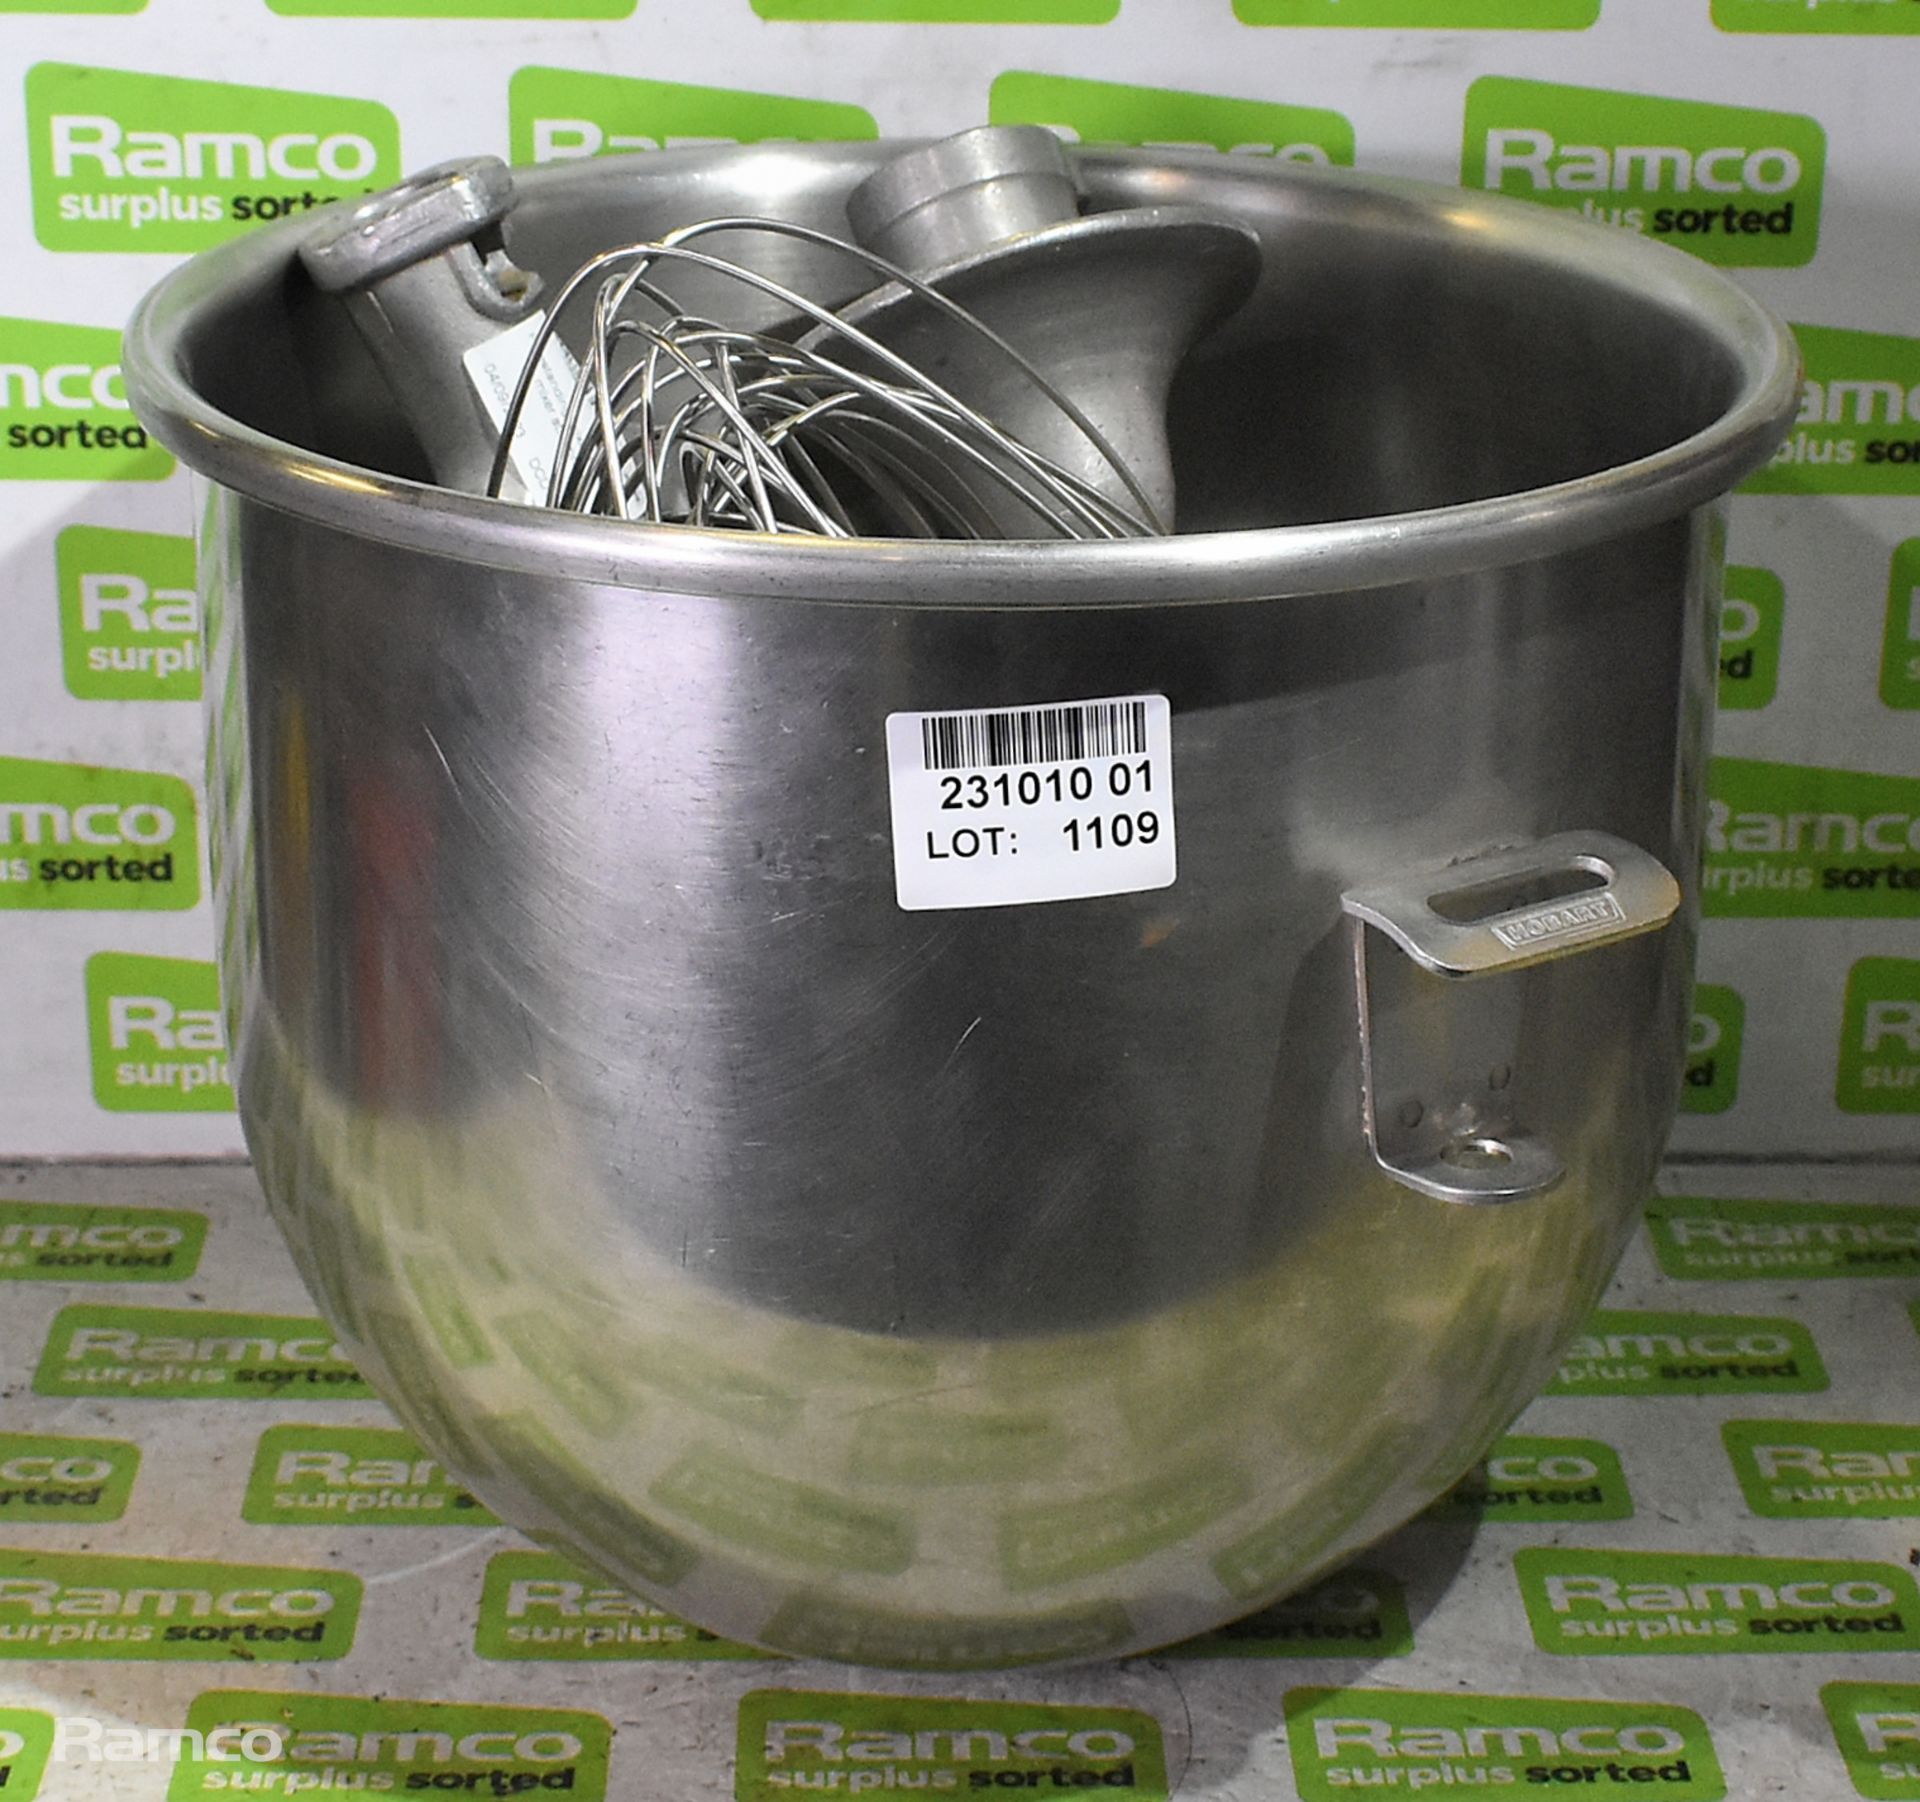 Hobart A-200-20 freestanding mixer mixing bowl with attachments